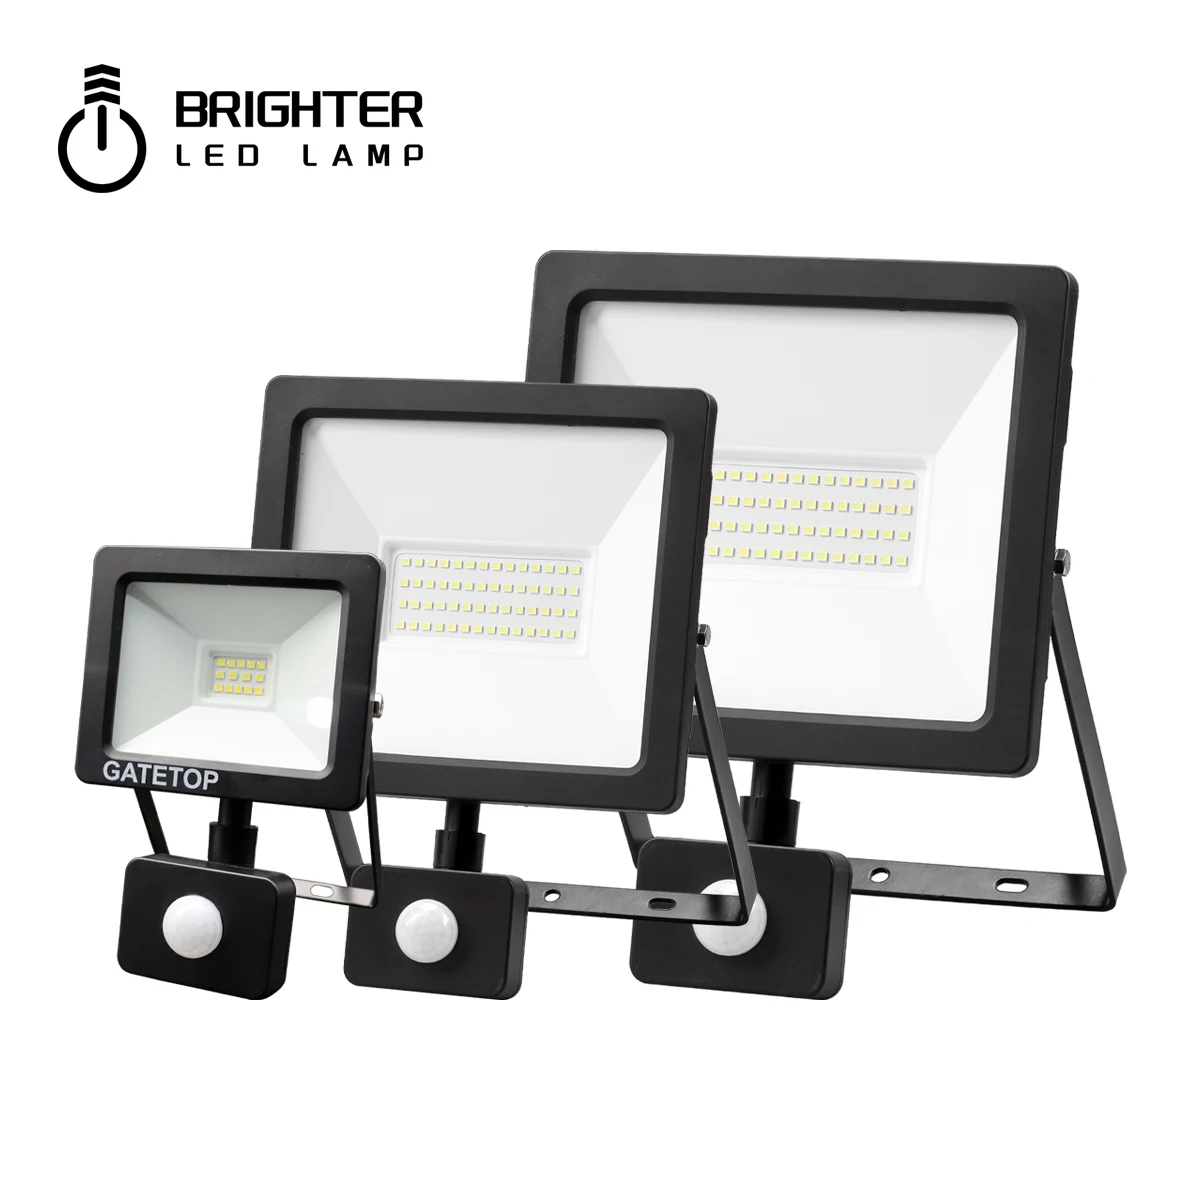 Super Bright Outdoor Lighting 1 Pack Motion Sensor Security & Flood Light 10w 30w 50w For Site Illumination Adjustable Angles